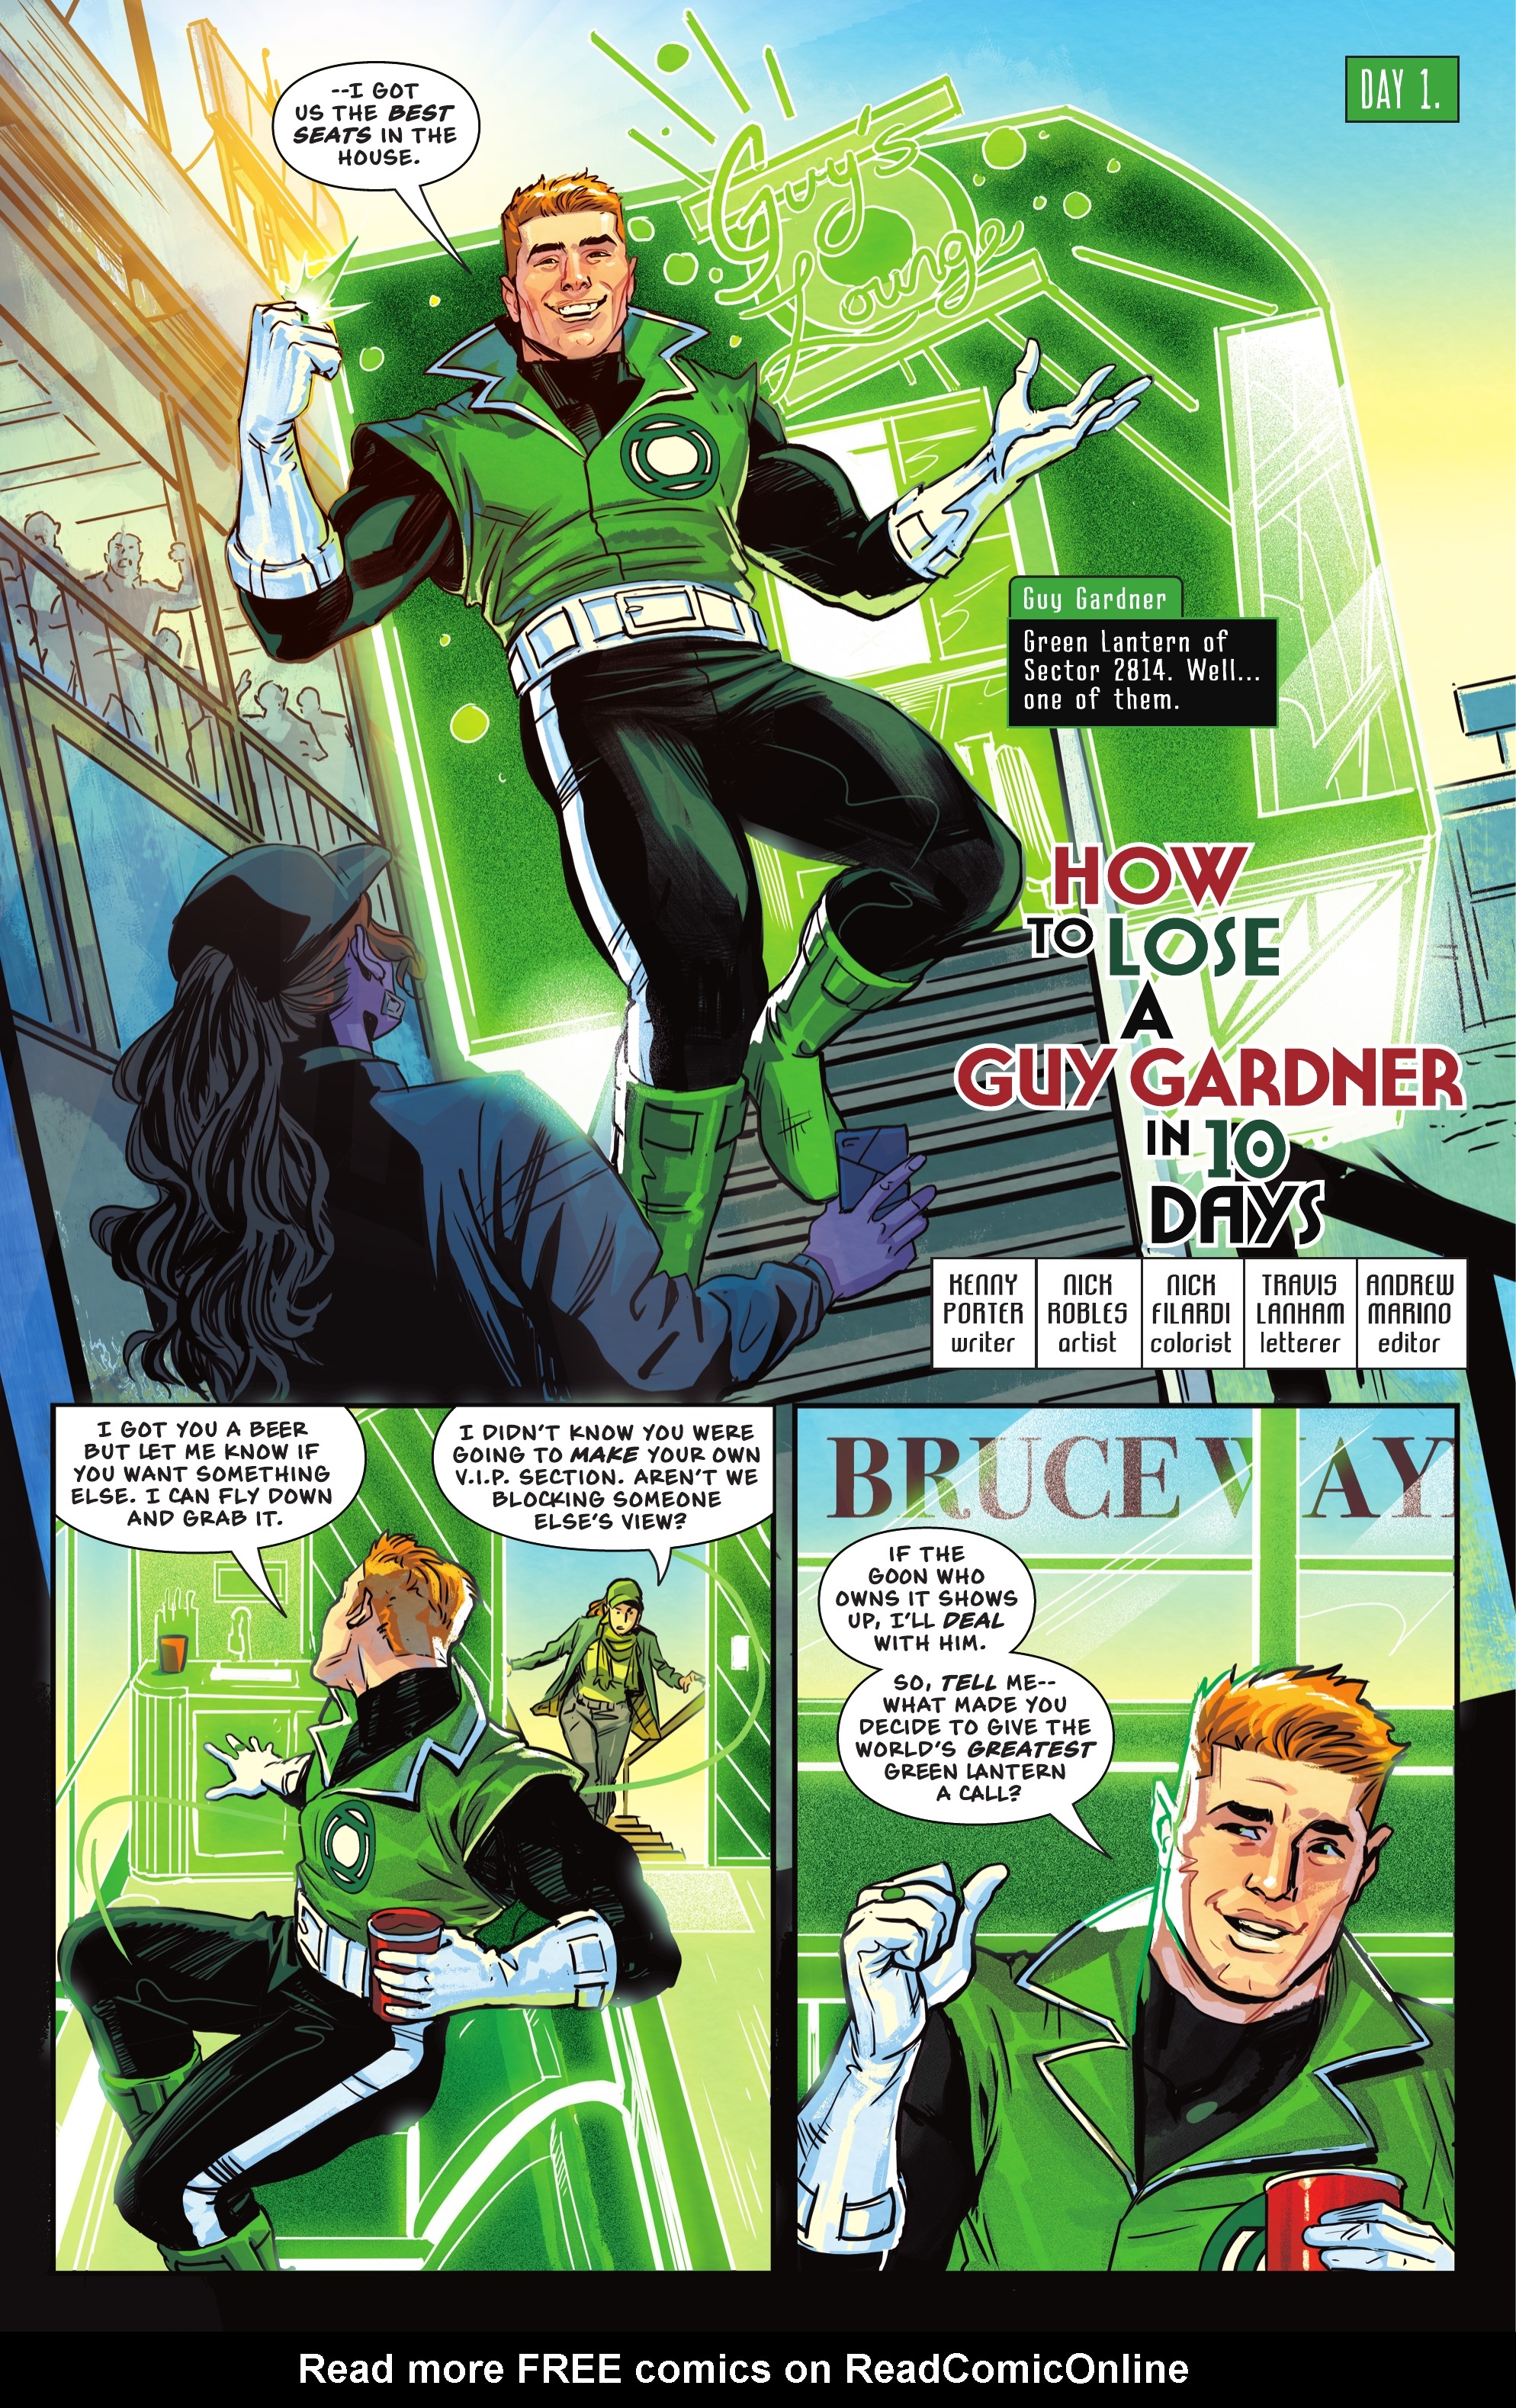 Read online DC's How to Lose a Guy Gardner in 10 Days comic -  Issue # TPB - 5